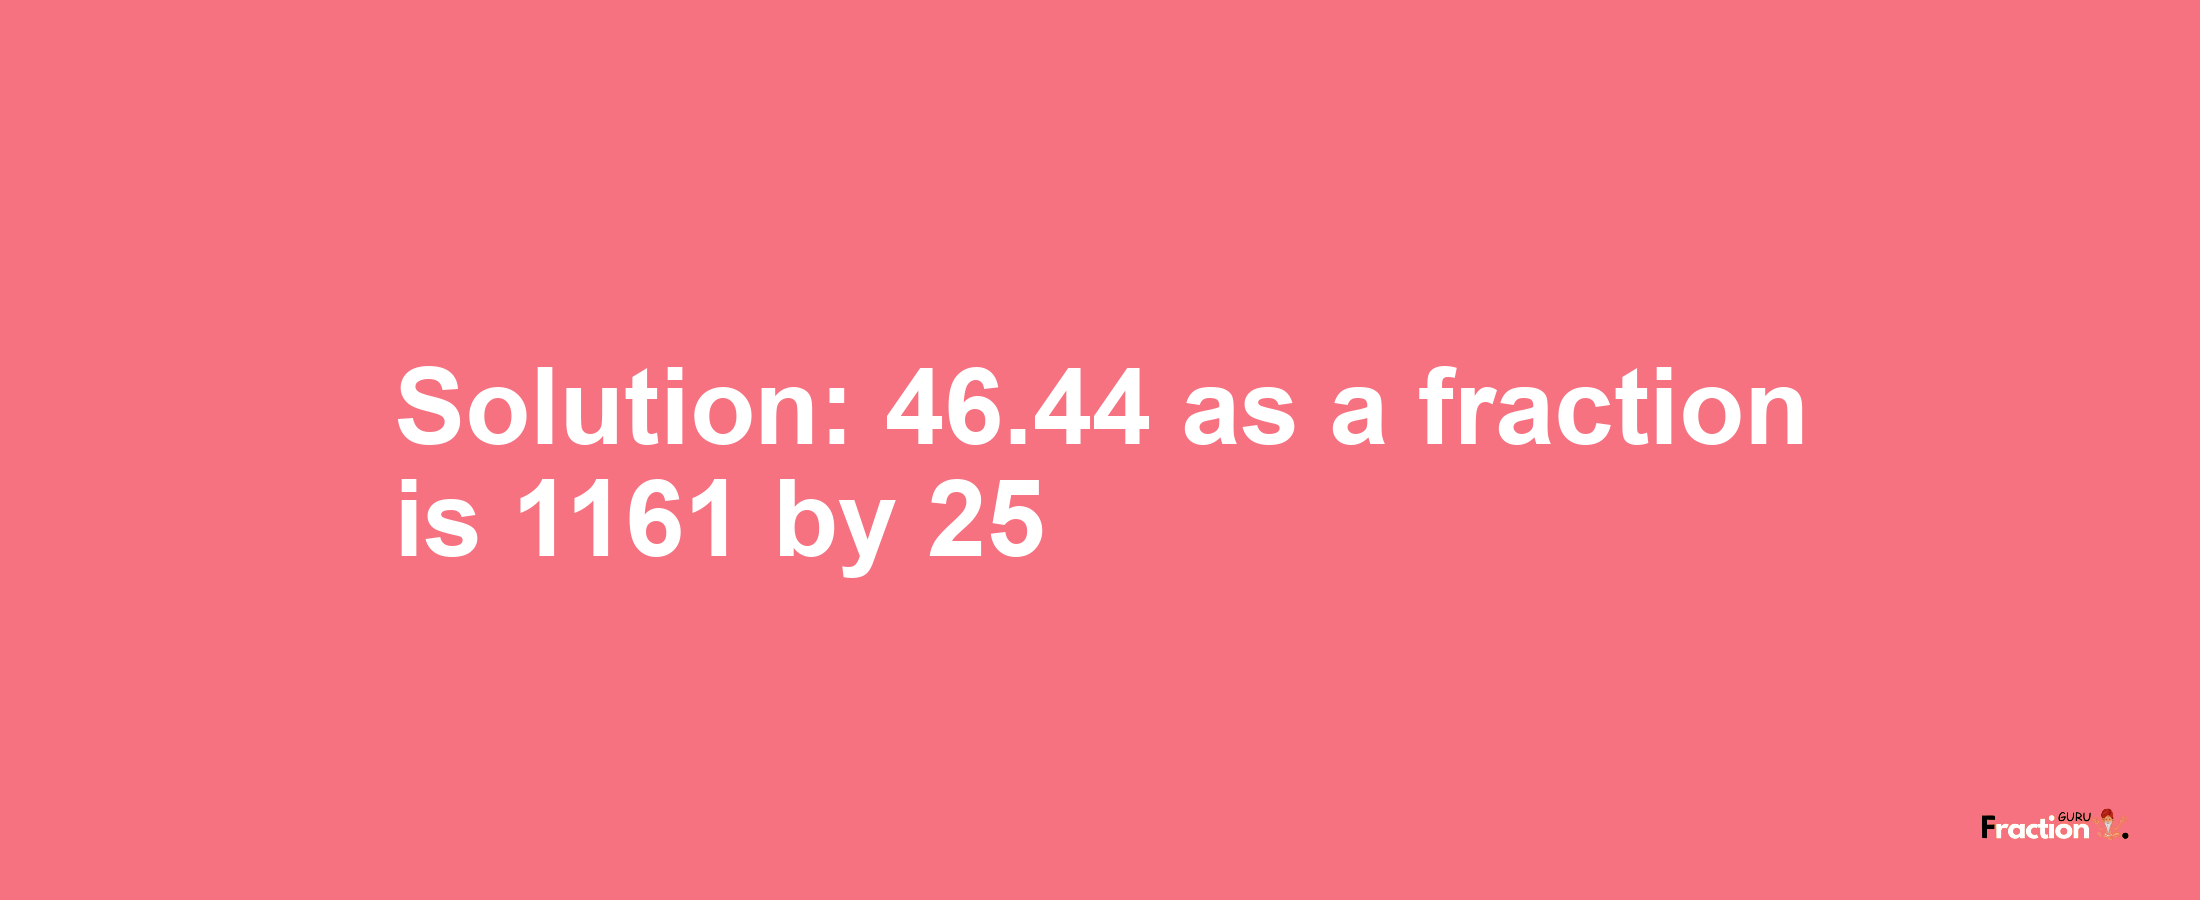 Solution:46.44 as a fraction is 1161/25